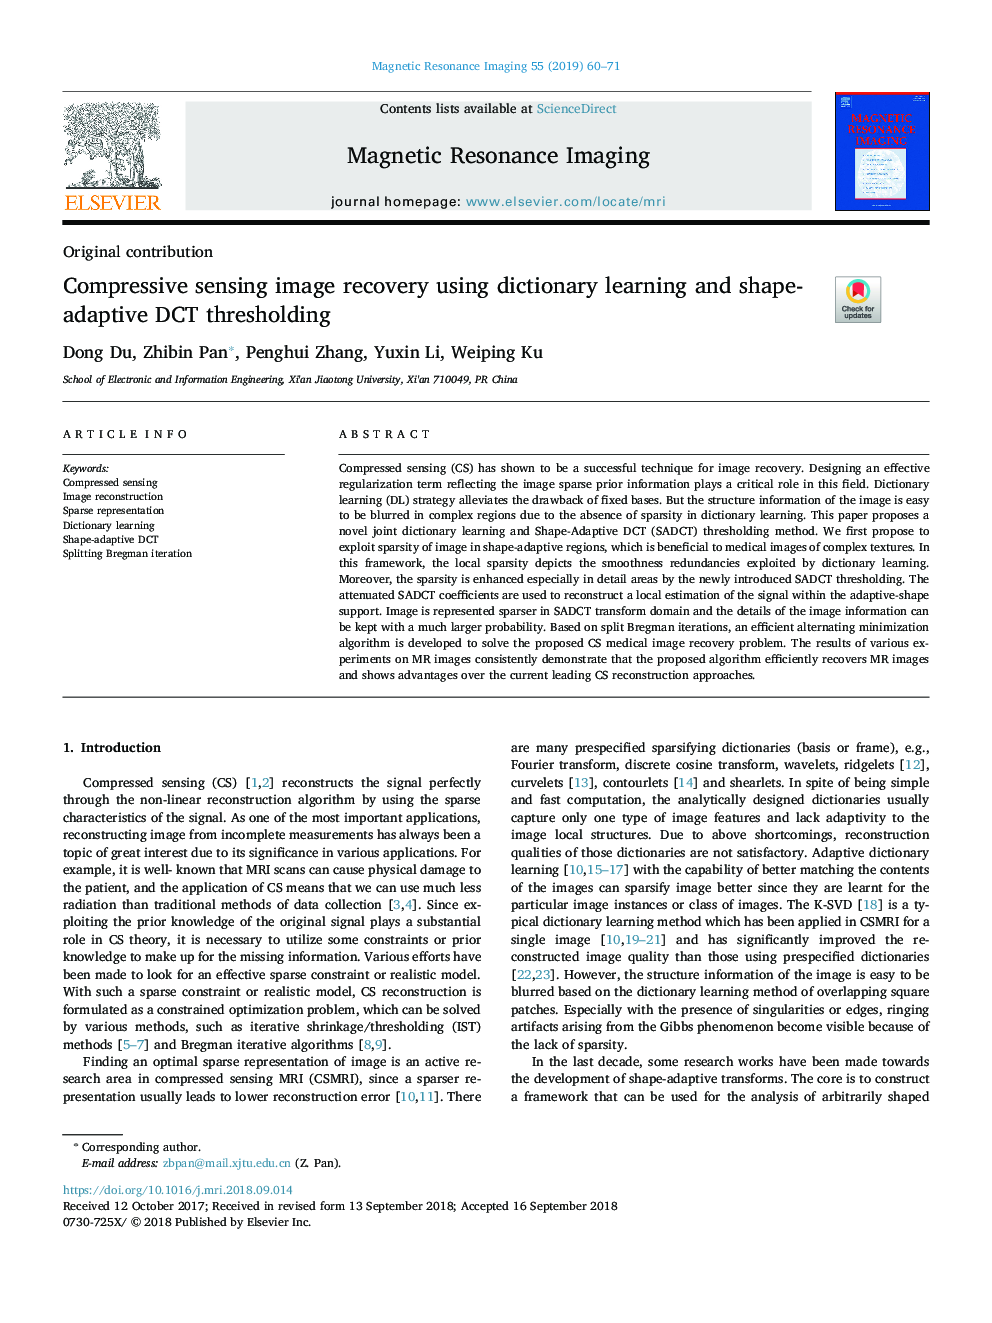 Compressive sensing image recovery using dictionary learning and shape-adaptive DCT thresholding